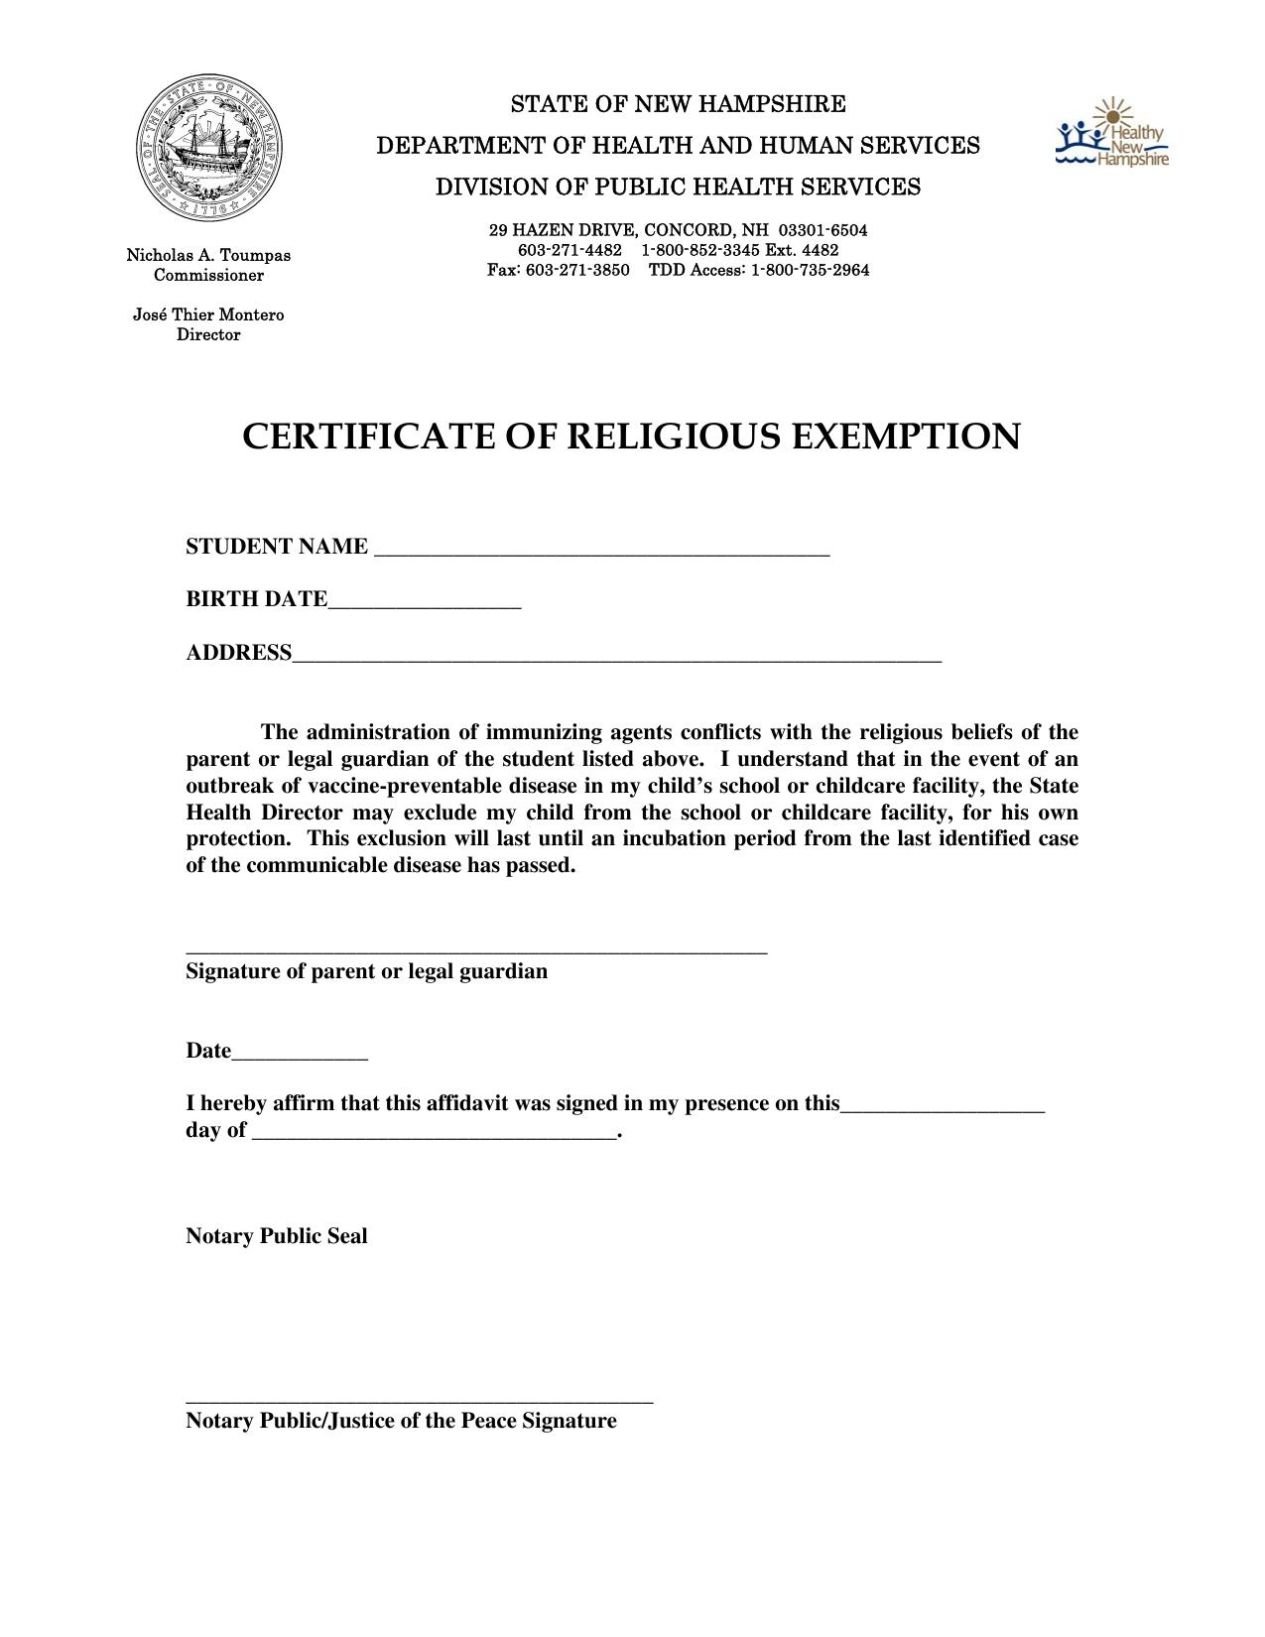 sample religious exemption letter for vaccines illinois